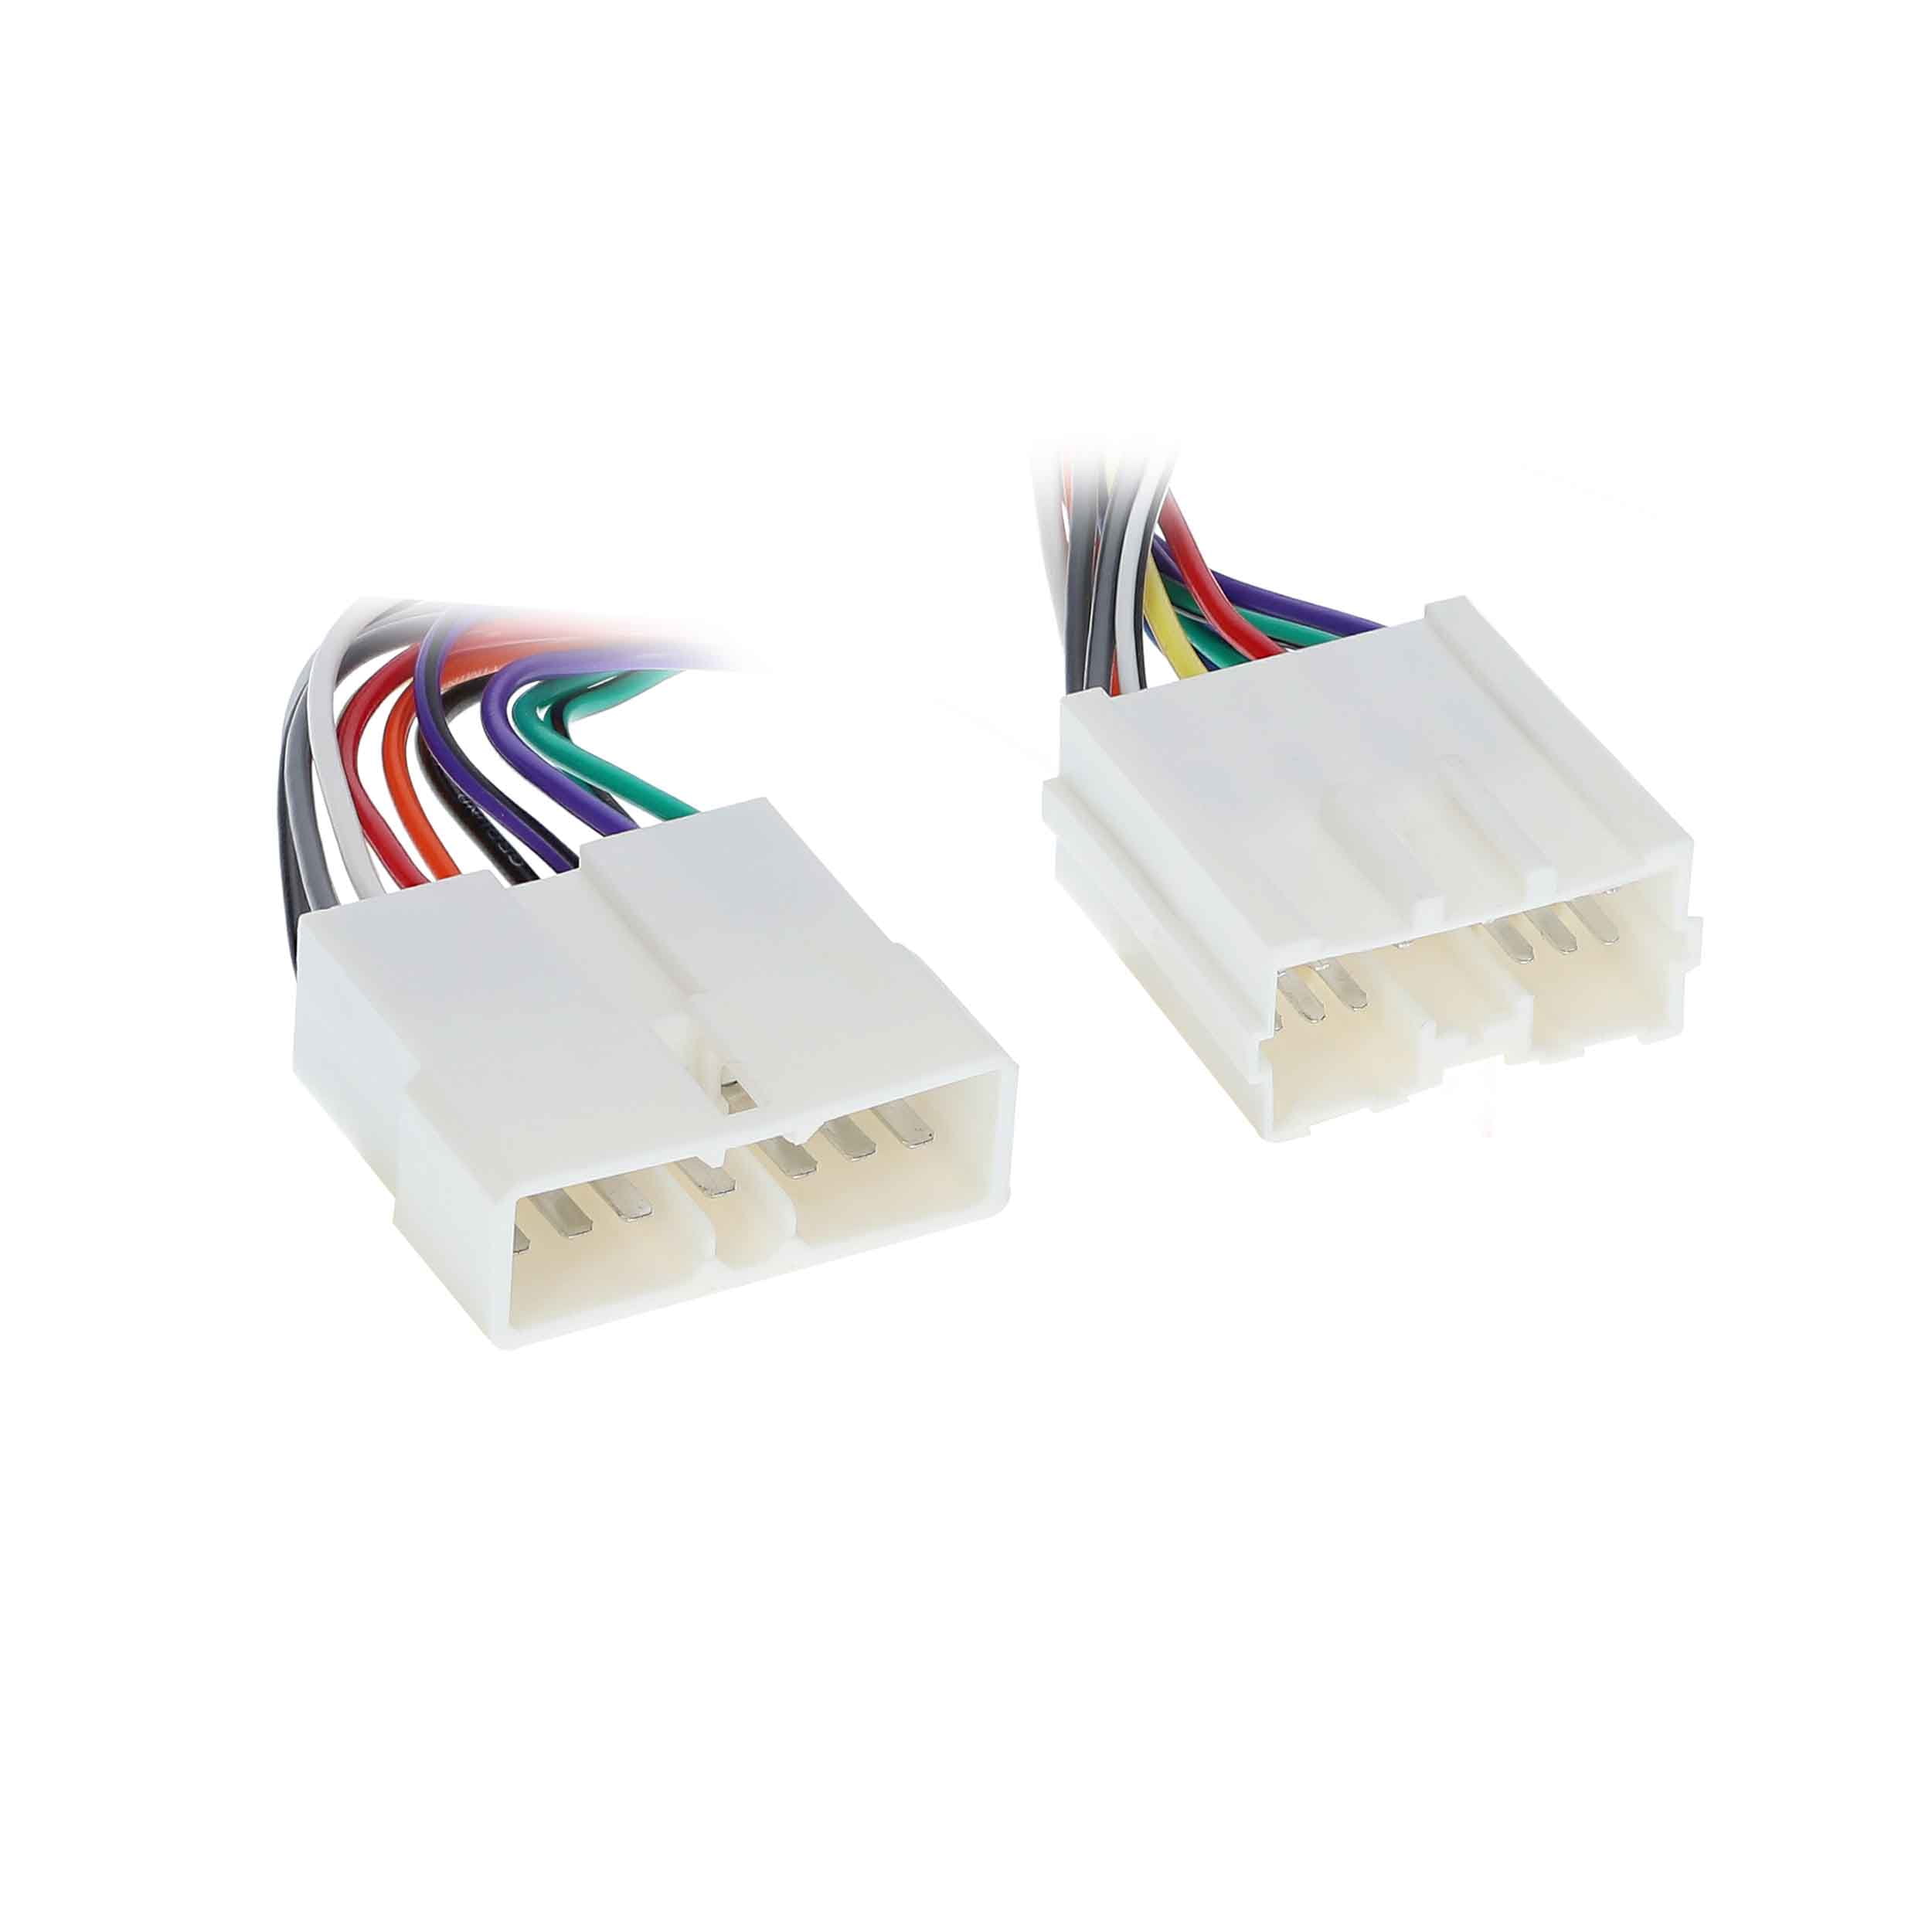 Metra car stereo wiring harness for sale online 